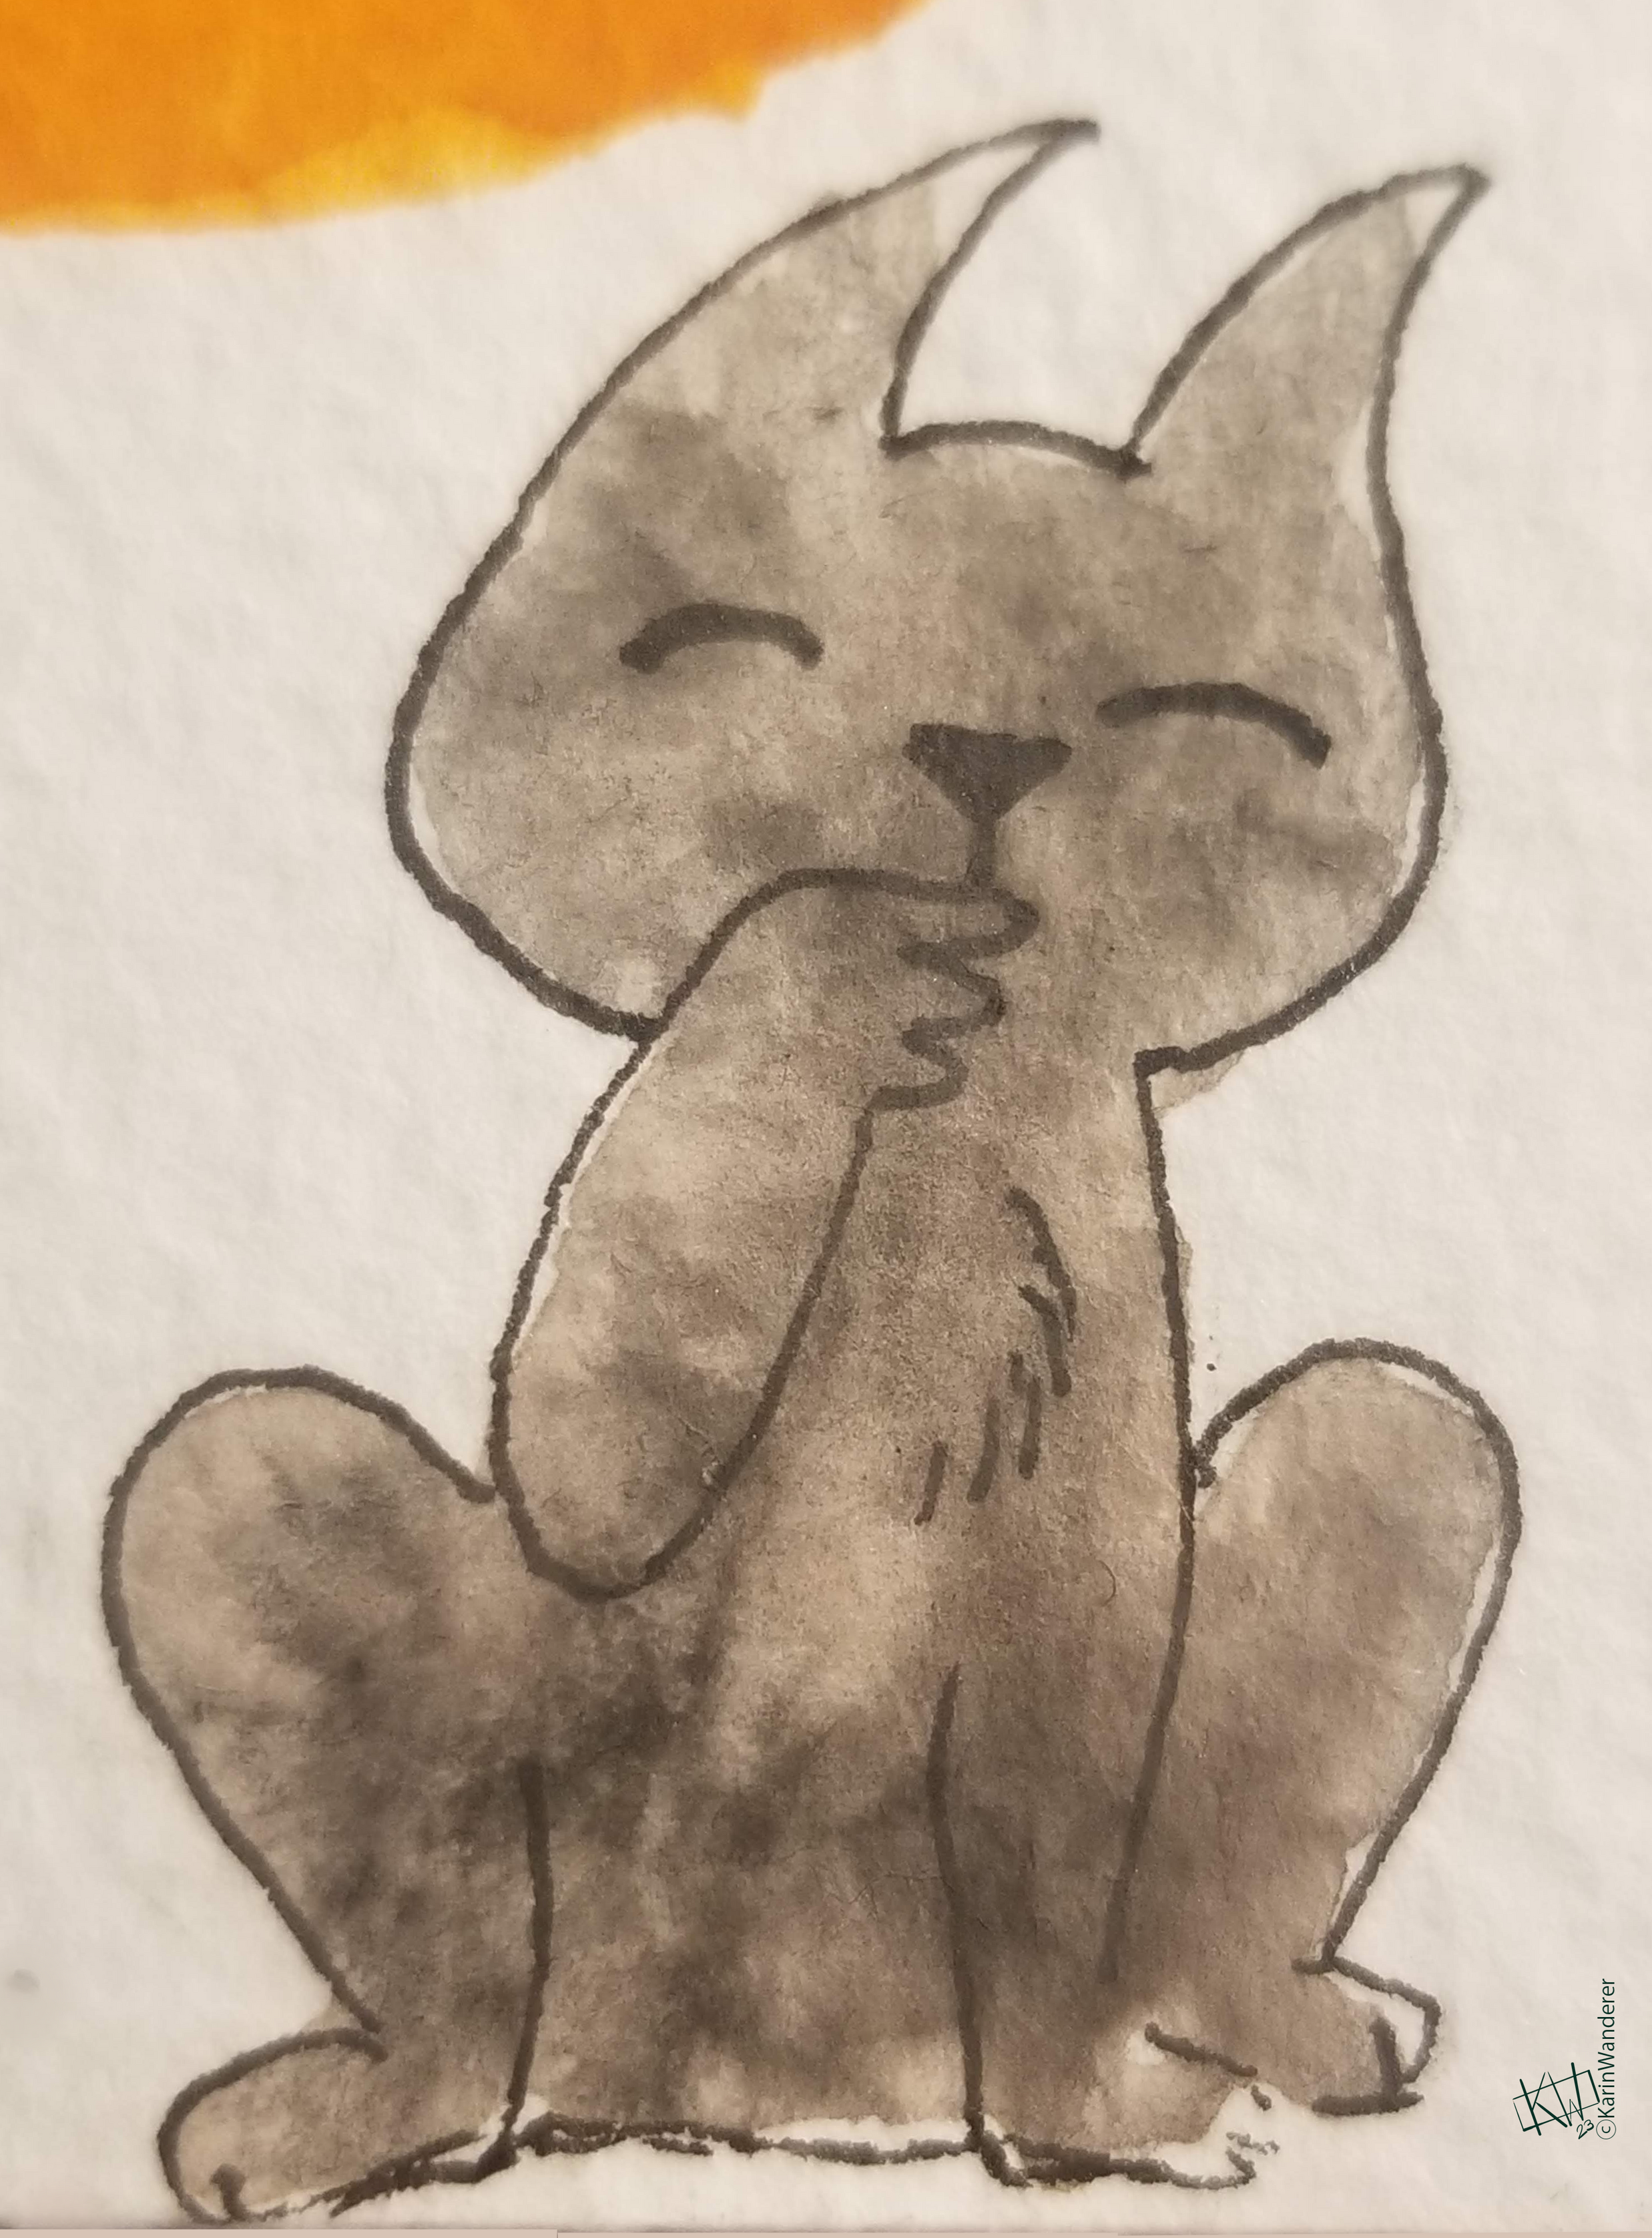 Watercolor of a black cat sitting happily.